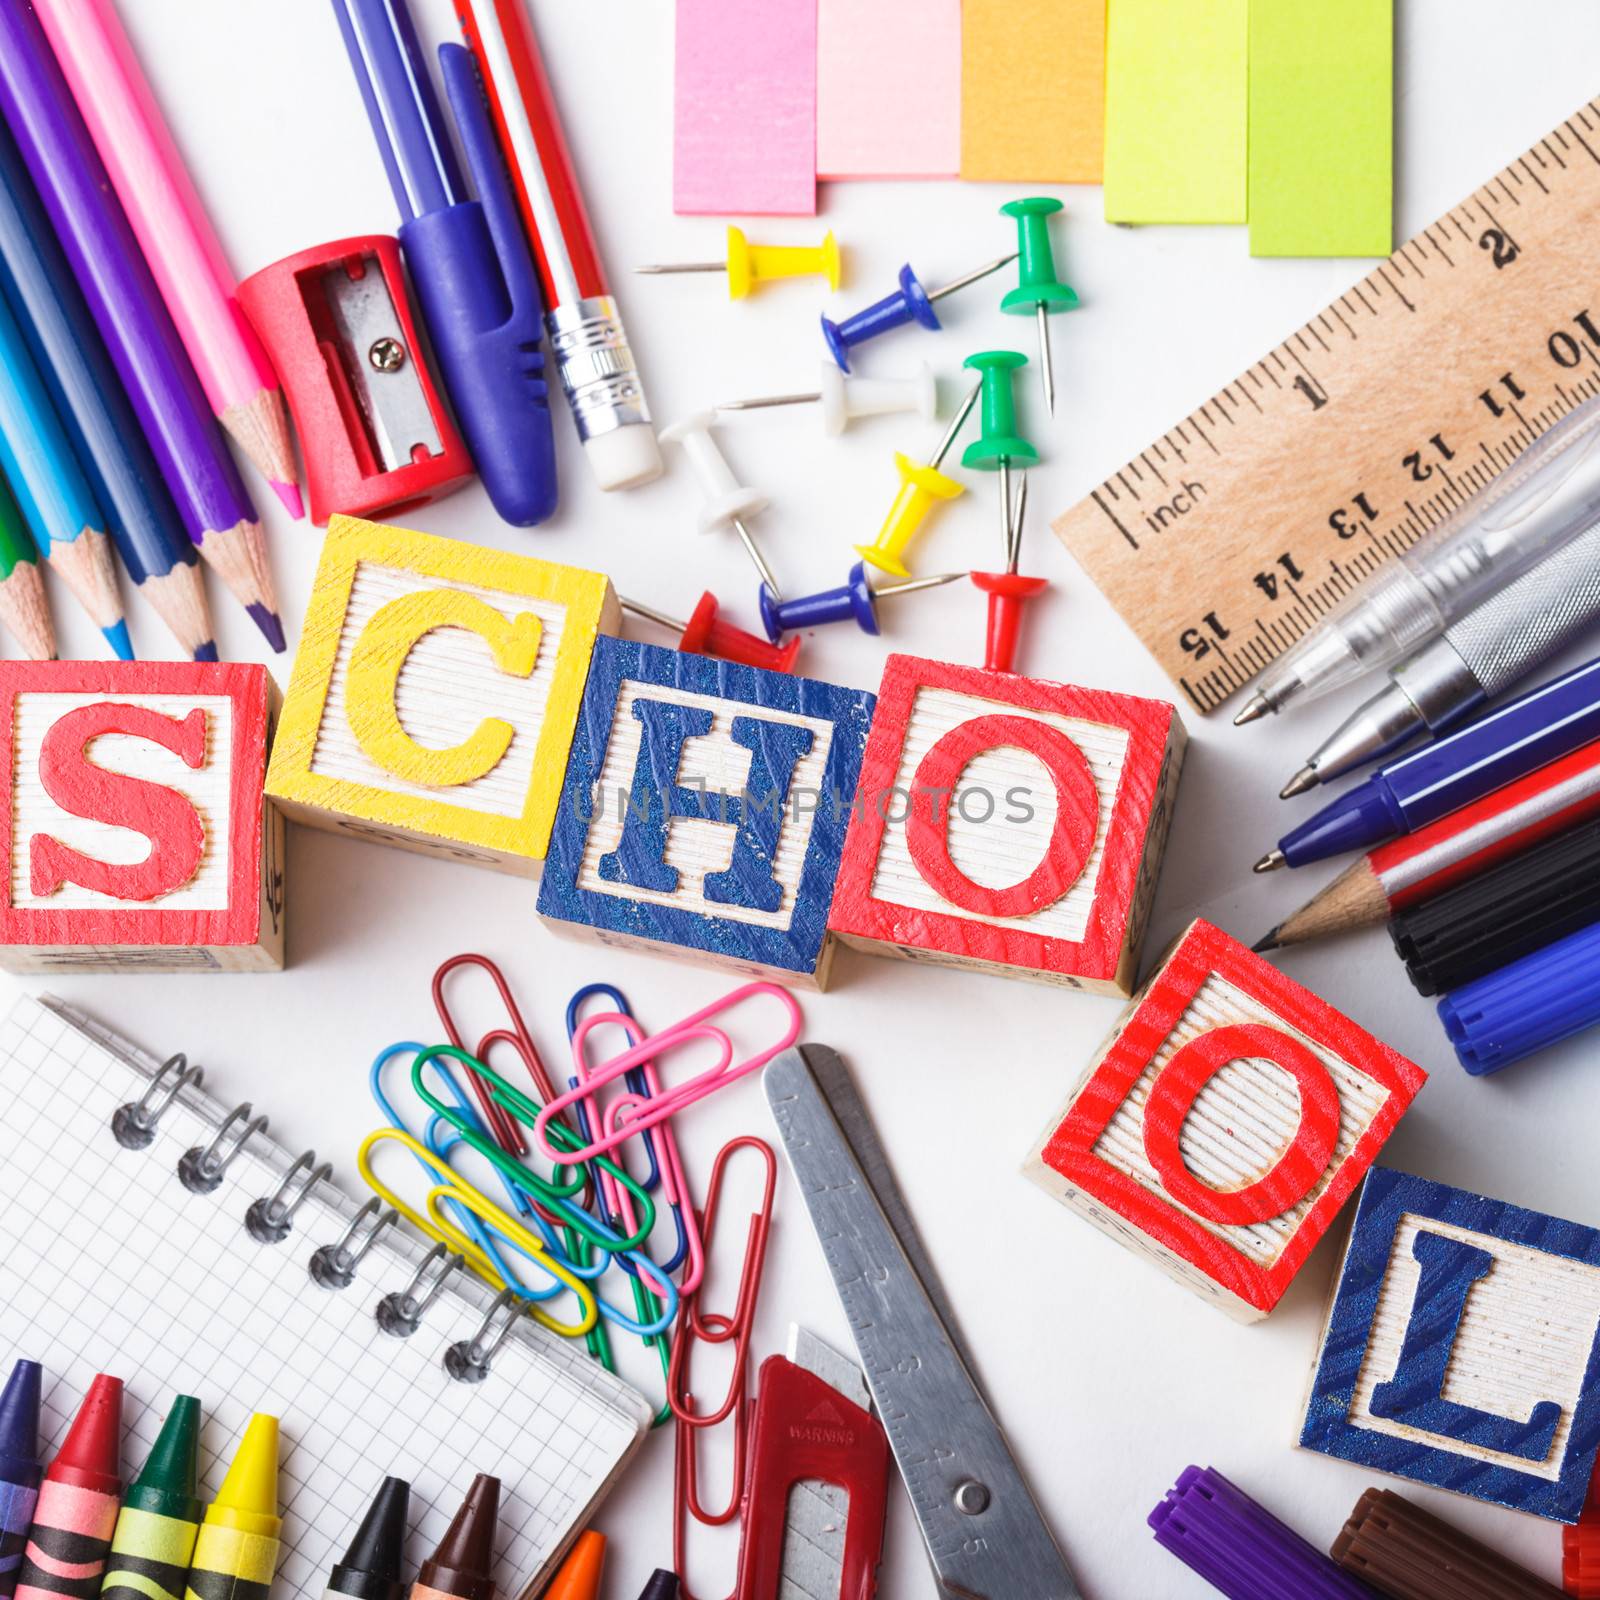 Primary school stationery on a white background